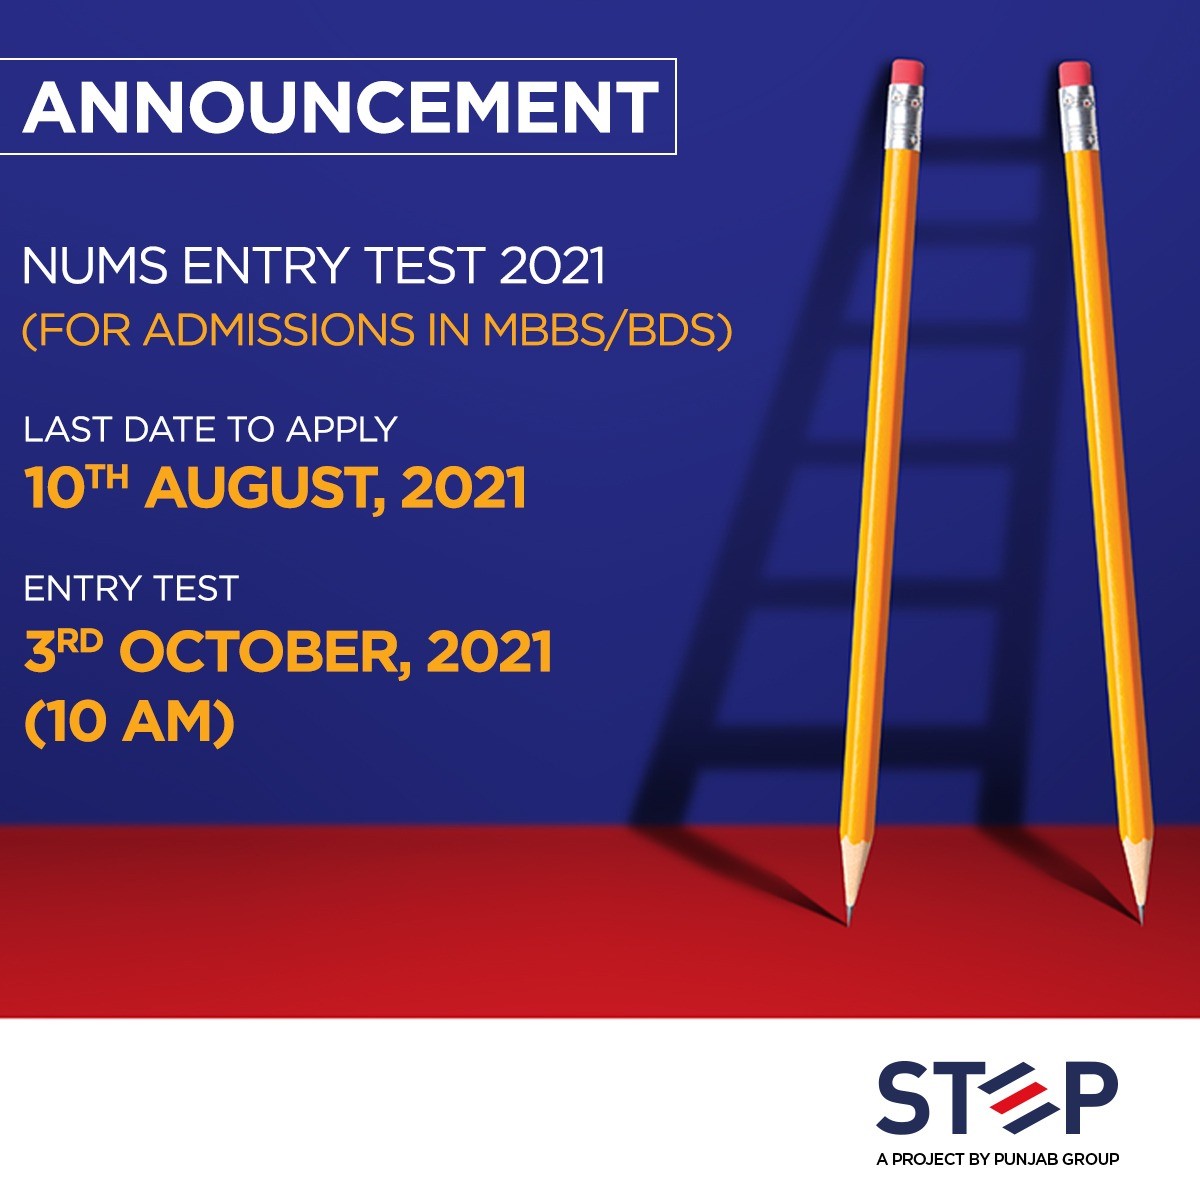 NUMS ENTRY TEST 2021 (FOR ADMISSIONS IN MBBS/ BDS)